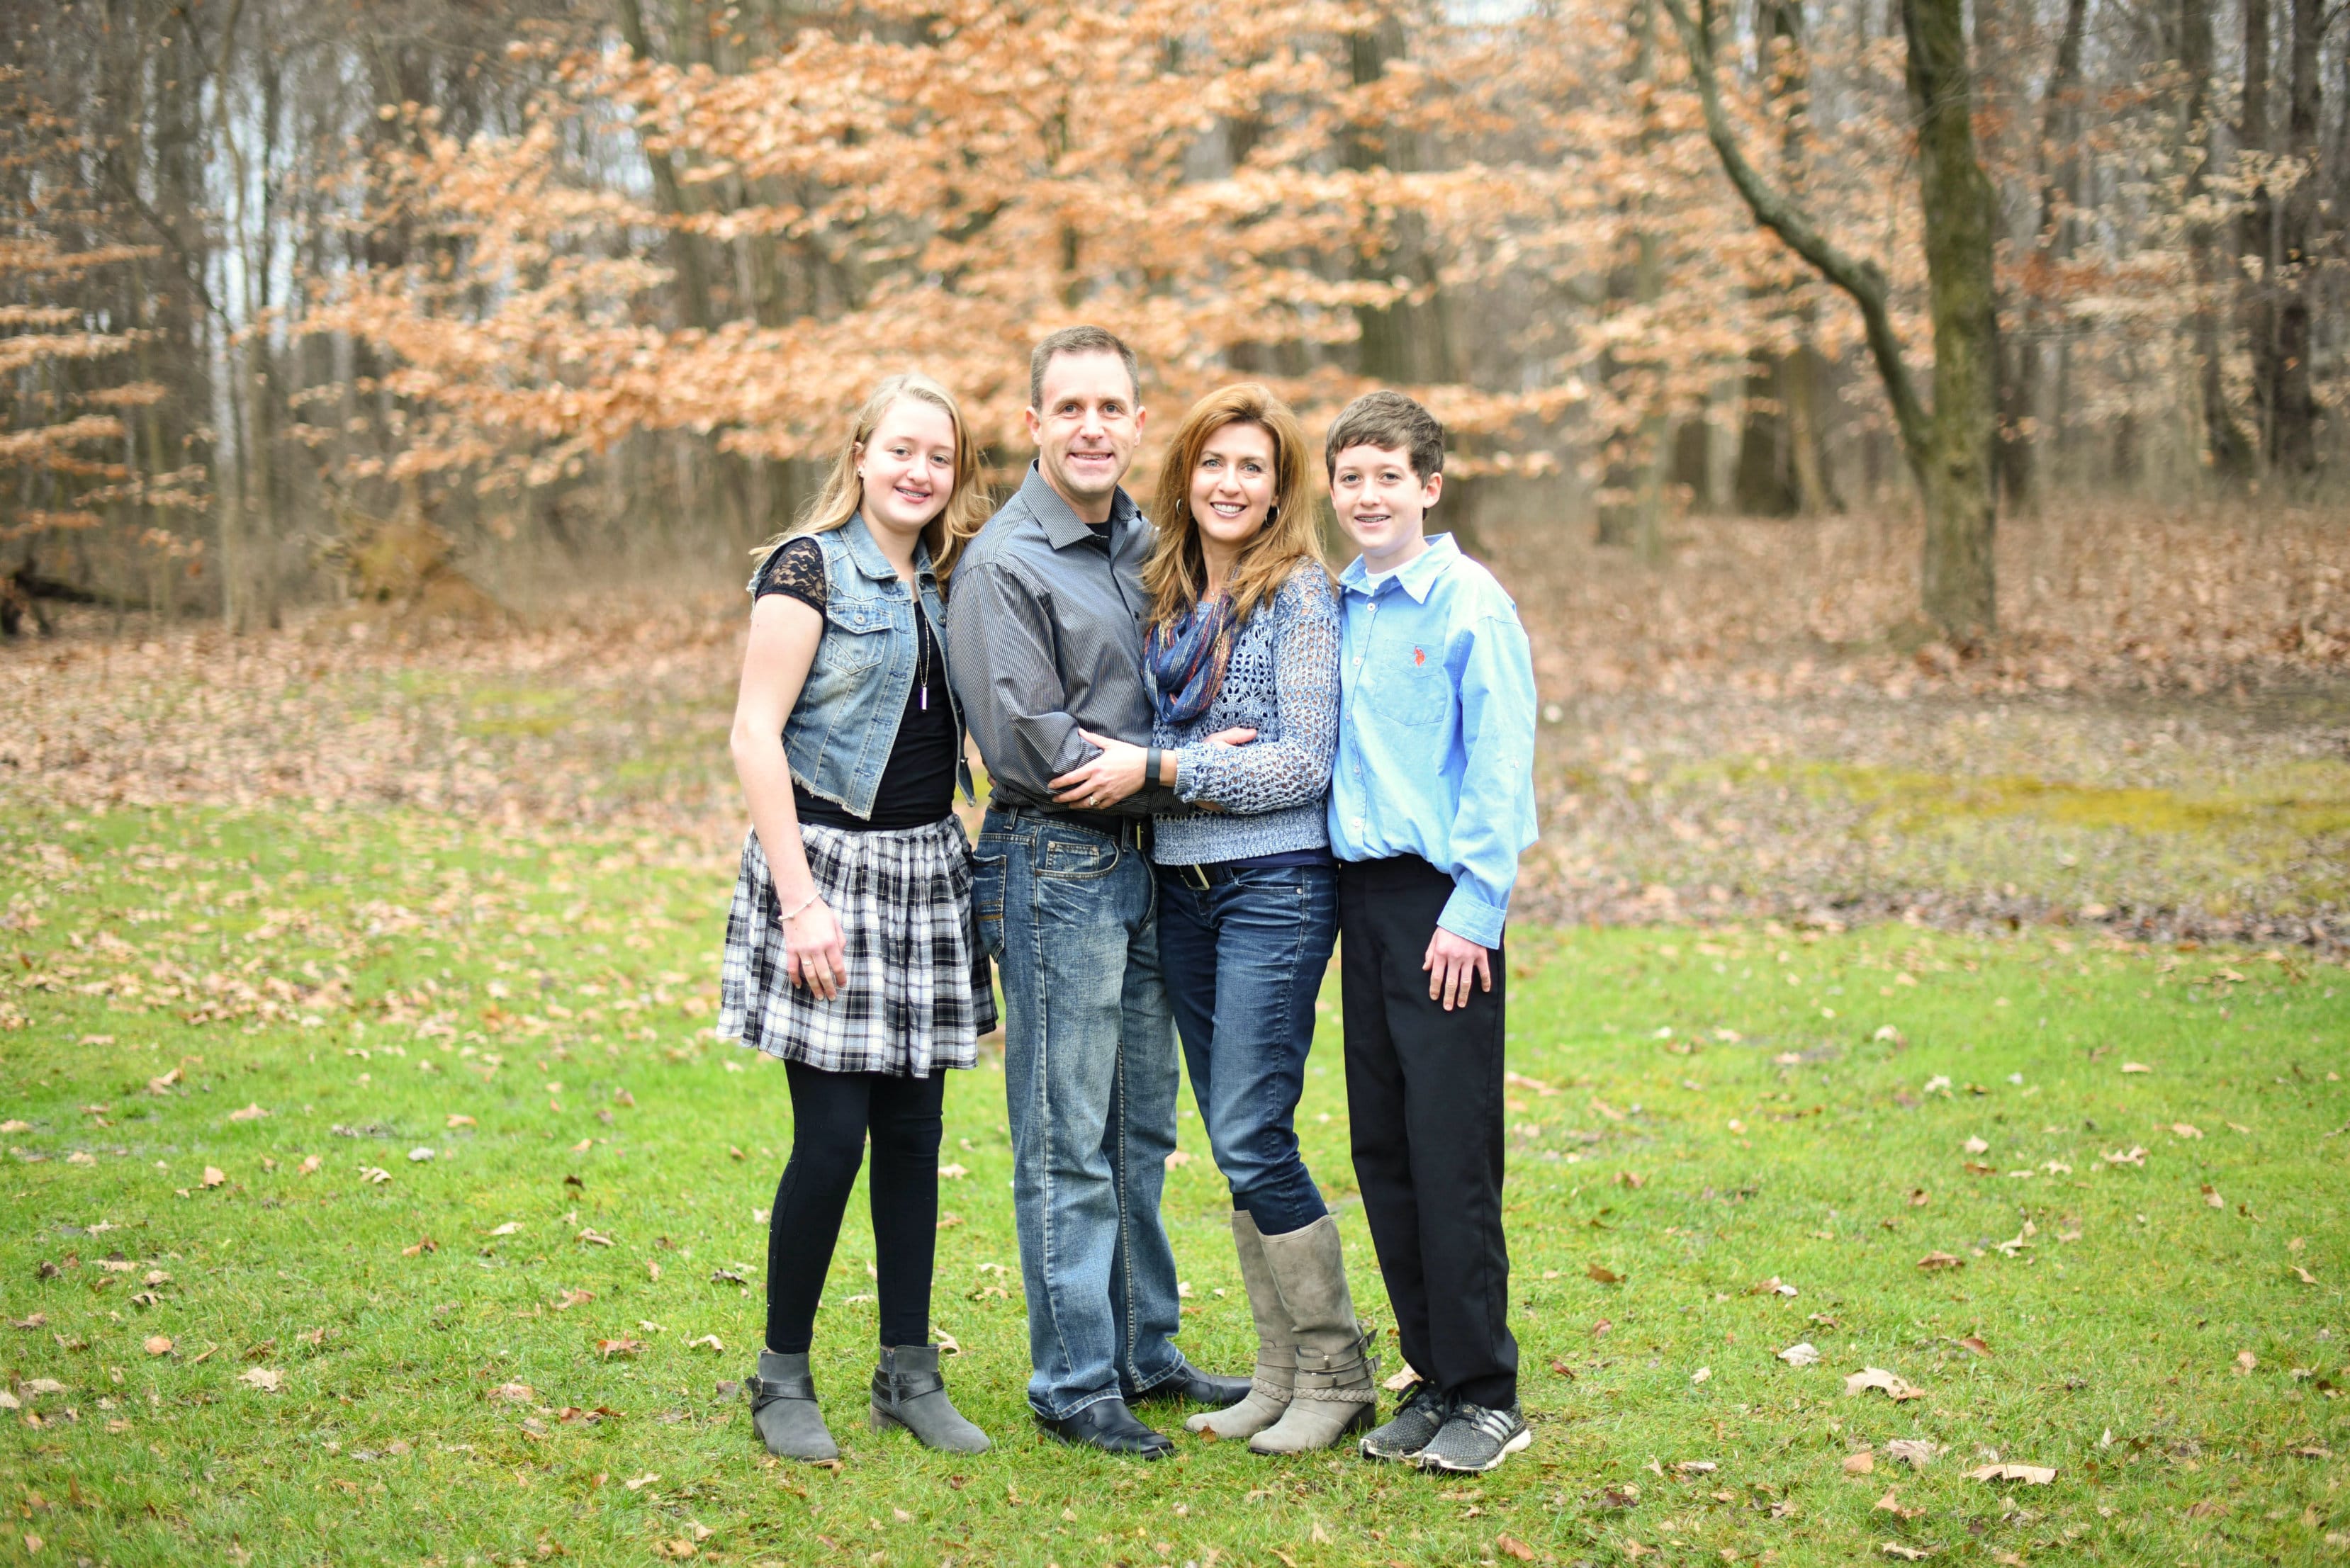 View More: http://susiemariephotography.pass.us/the-fulton-family